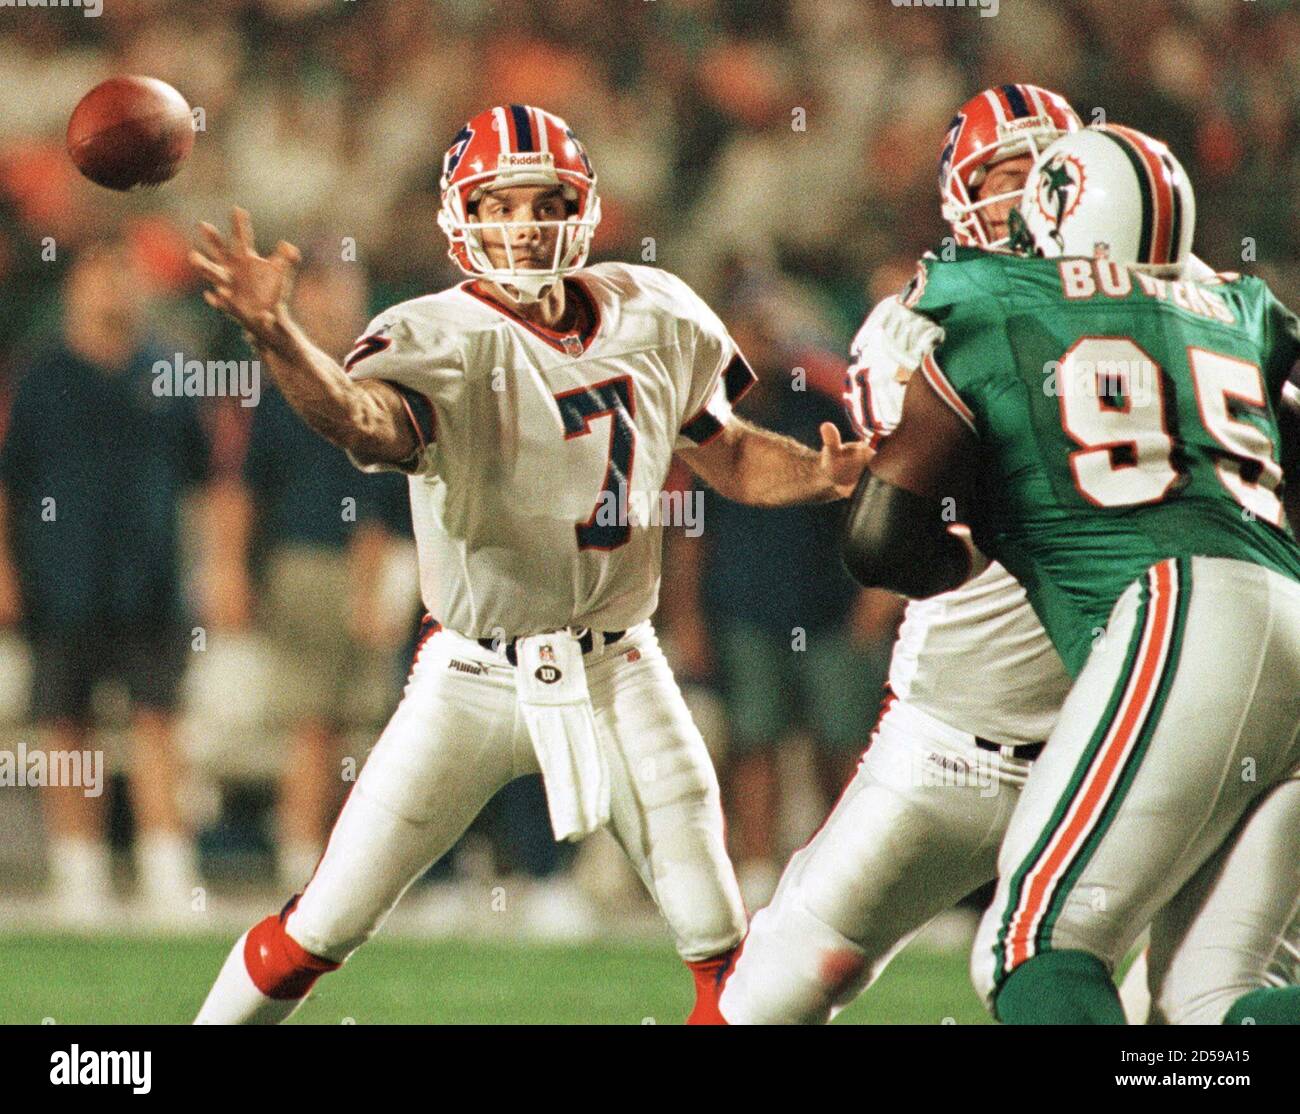 Buffalo Bills quarterback Doug Flutie (7) throws pass against the Dolphins in the